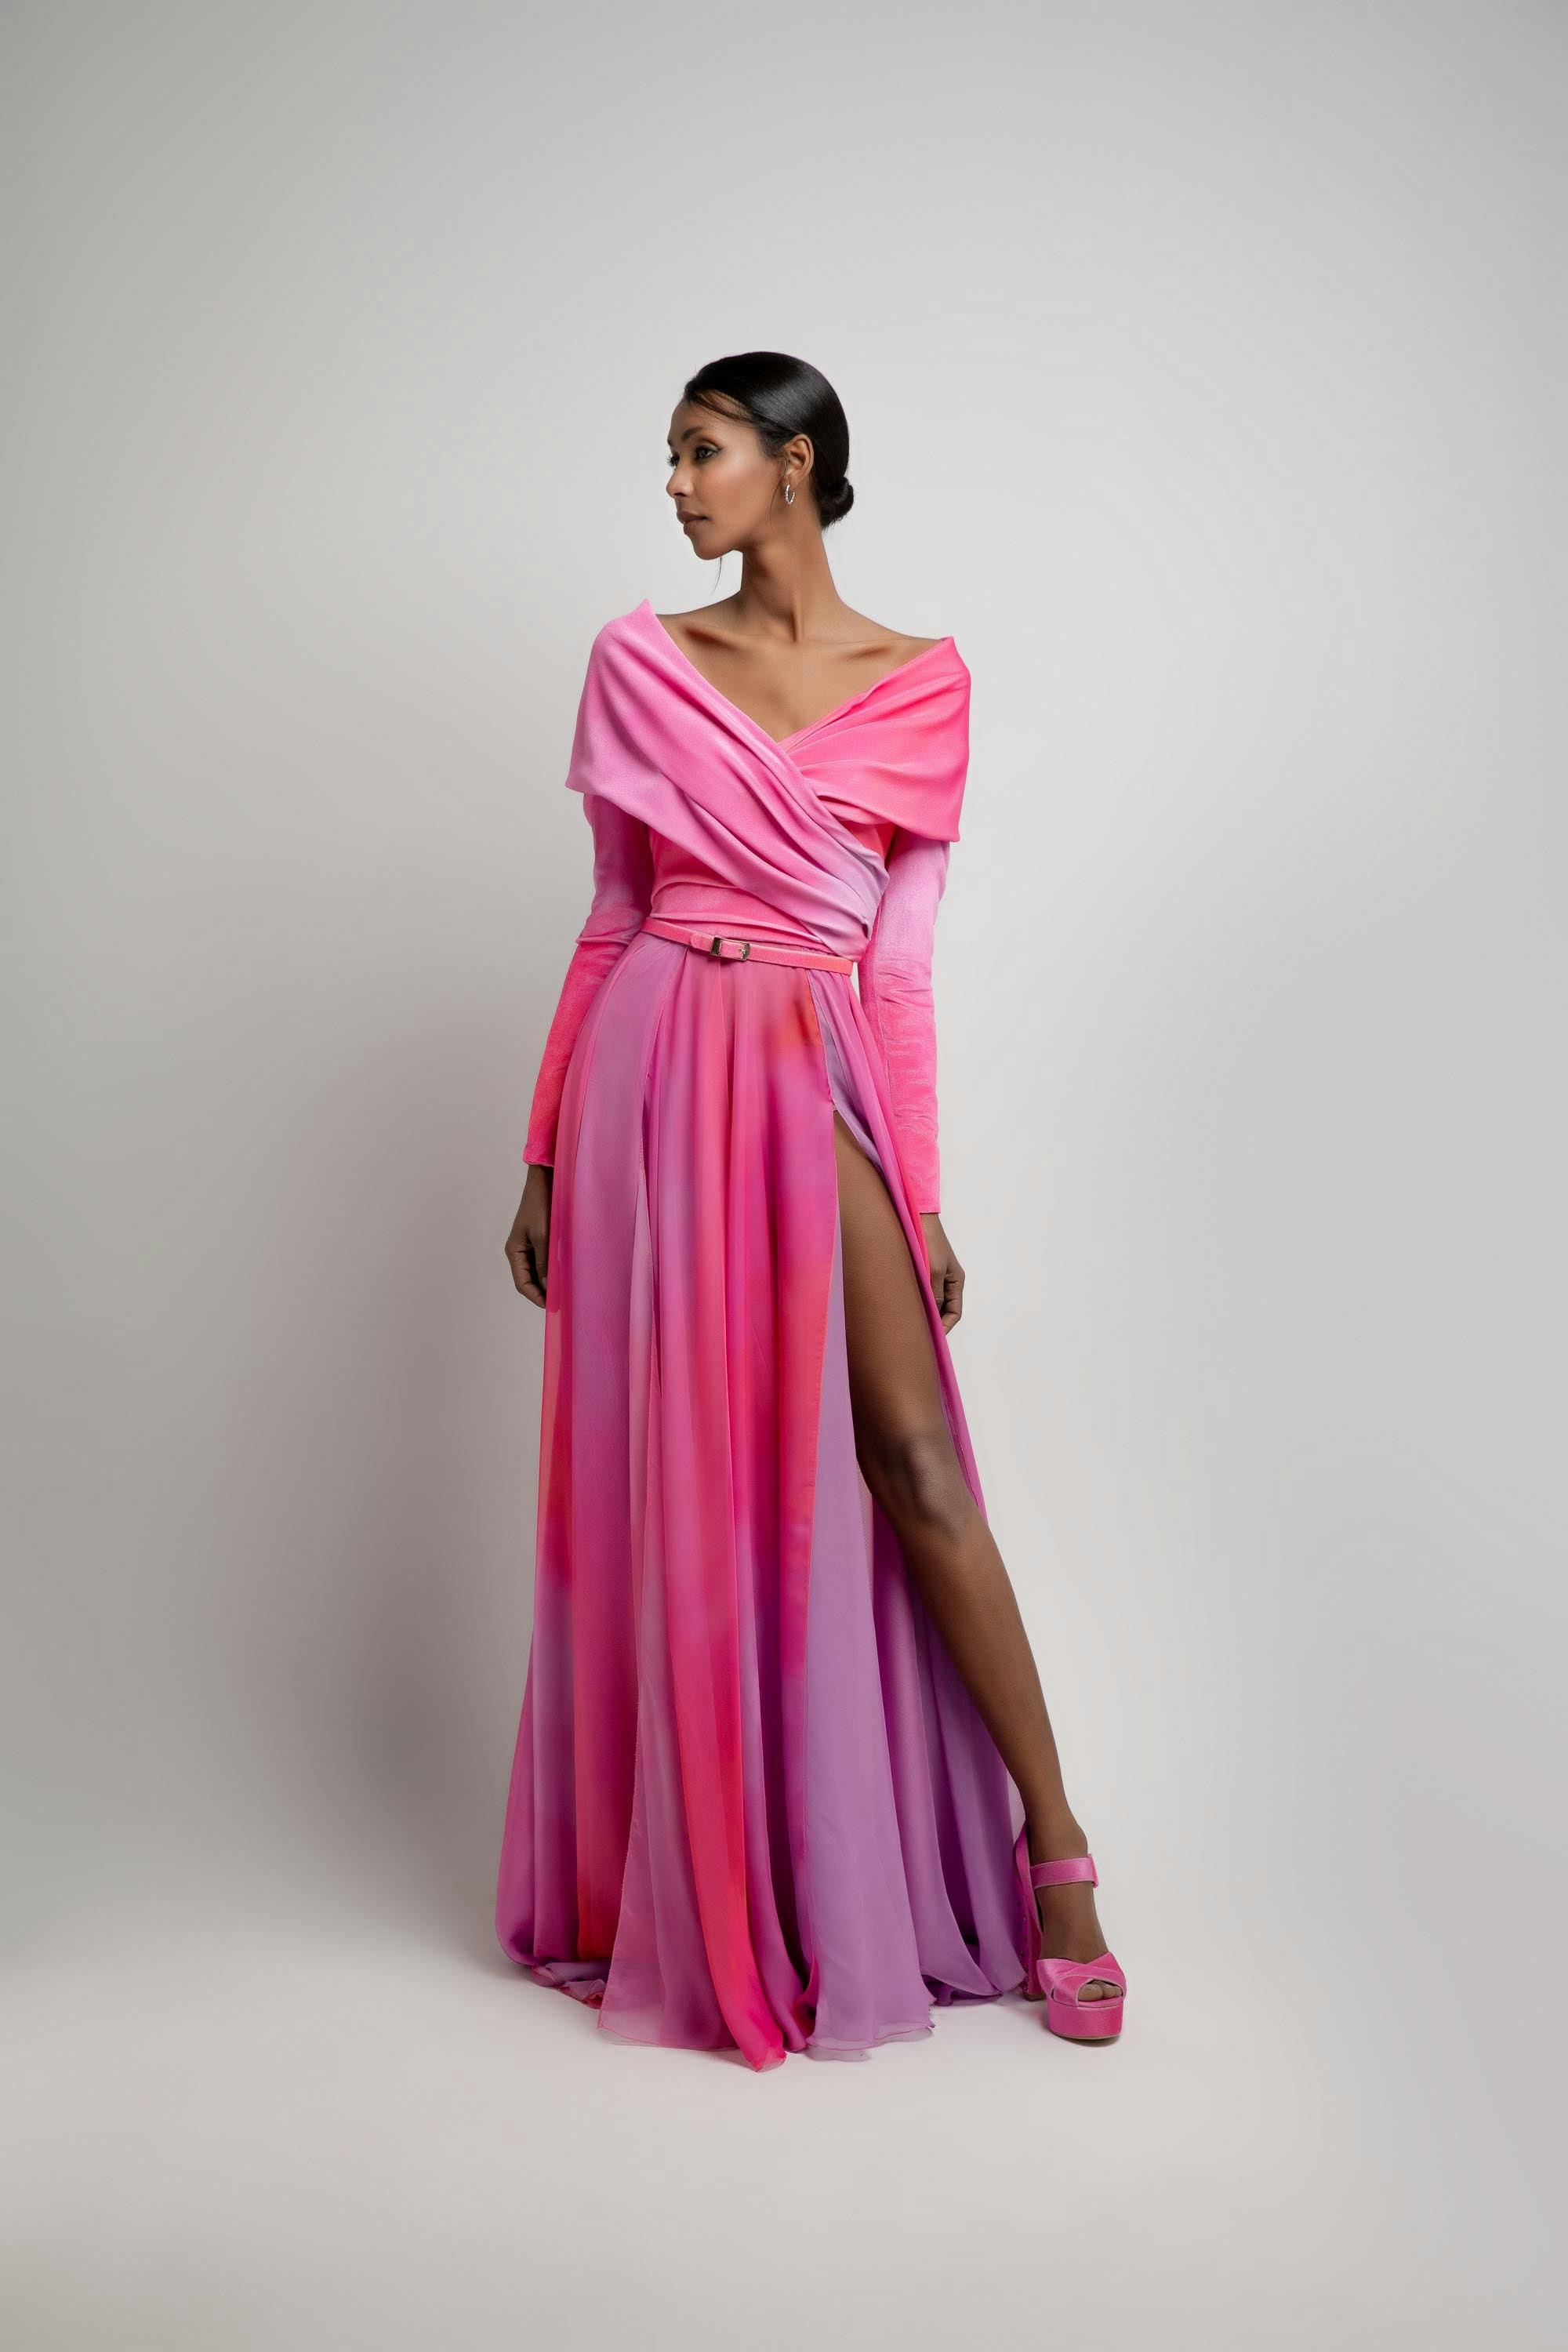 Look 2 - Jean fares couture - JFC-pink dress with long sleev,split leg and belt